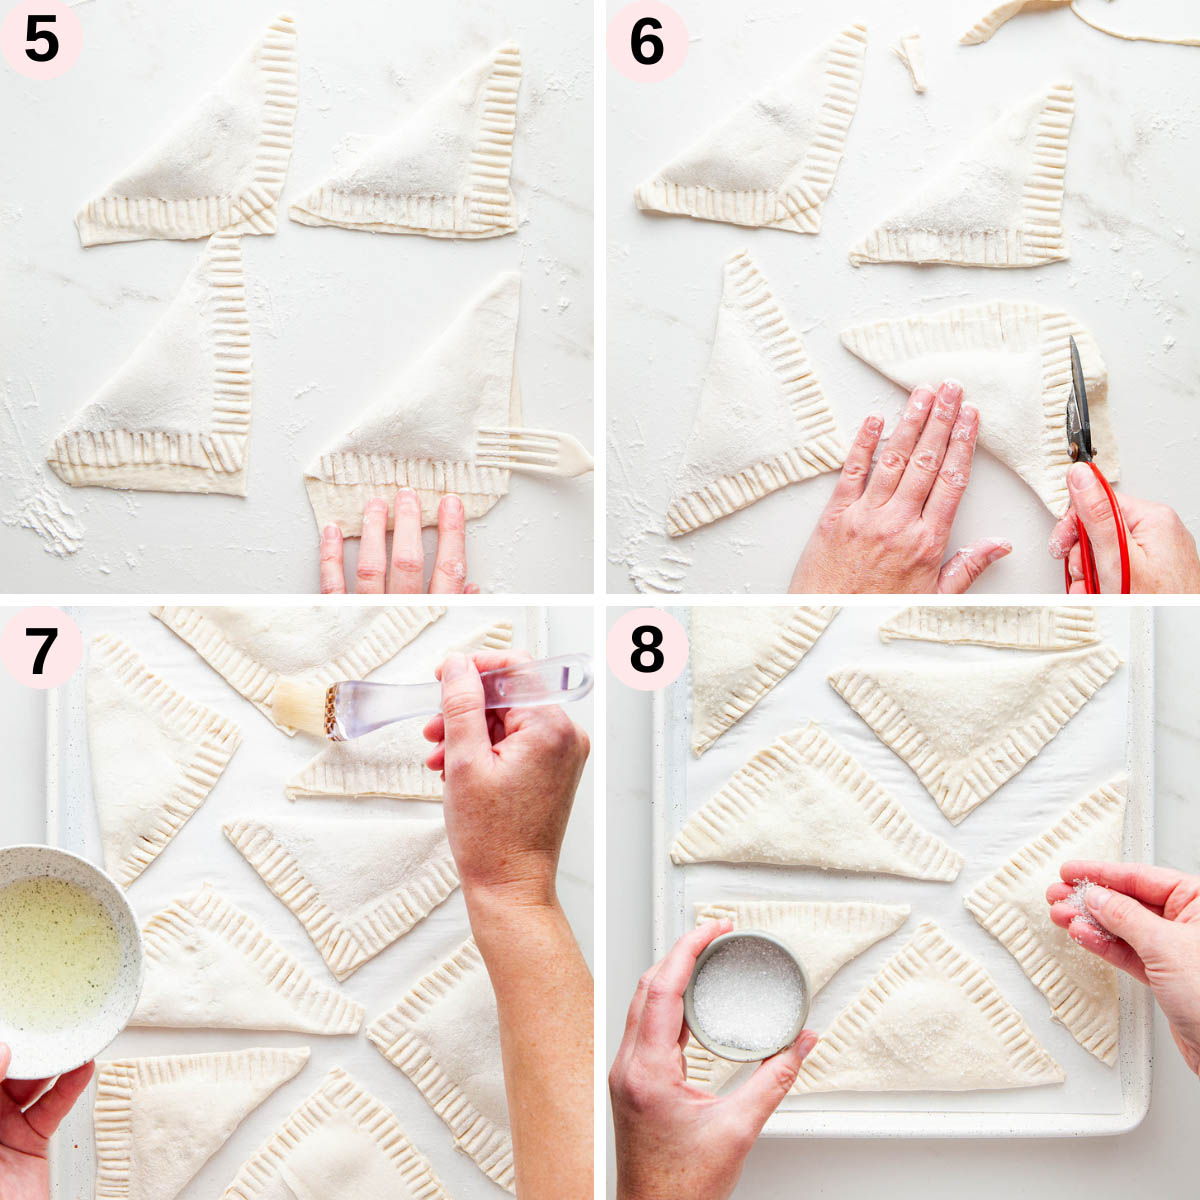 Peach turnover process shots 5 to 8.